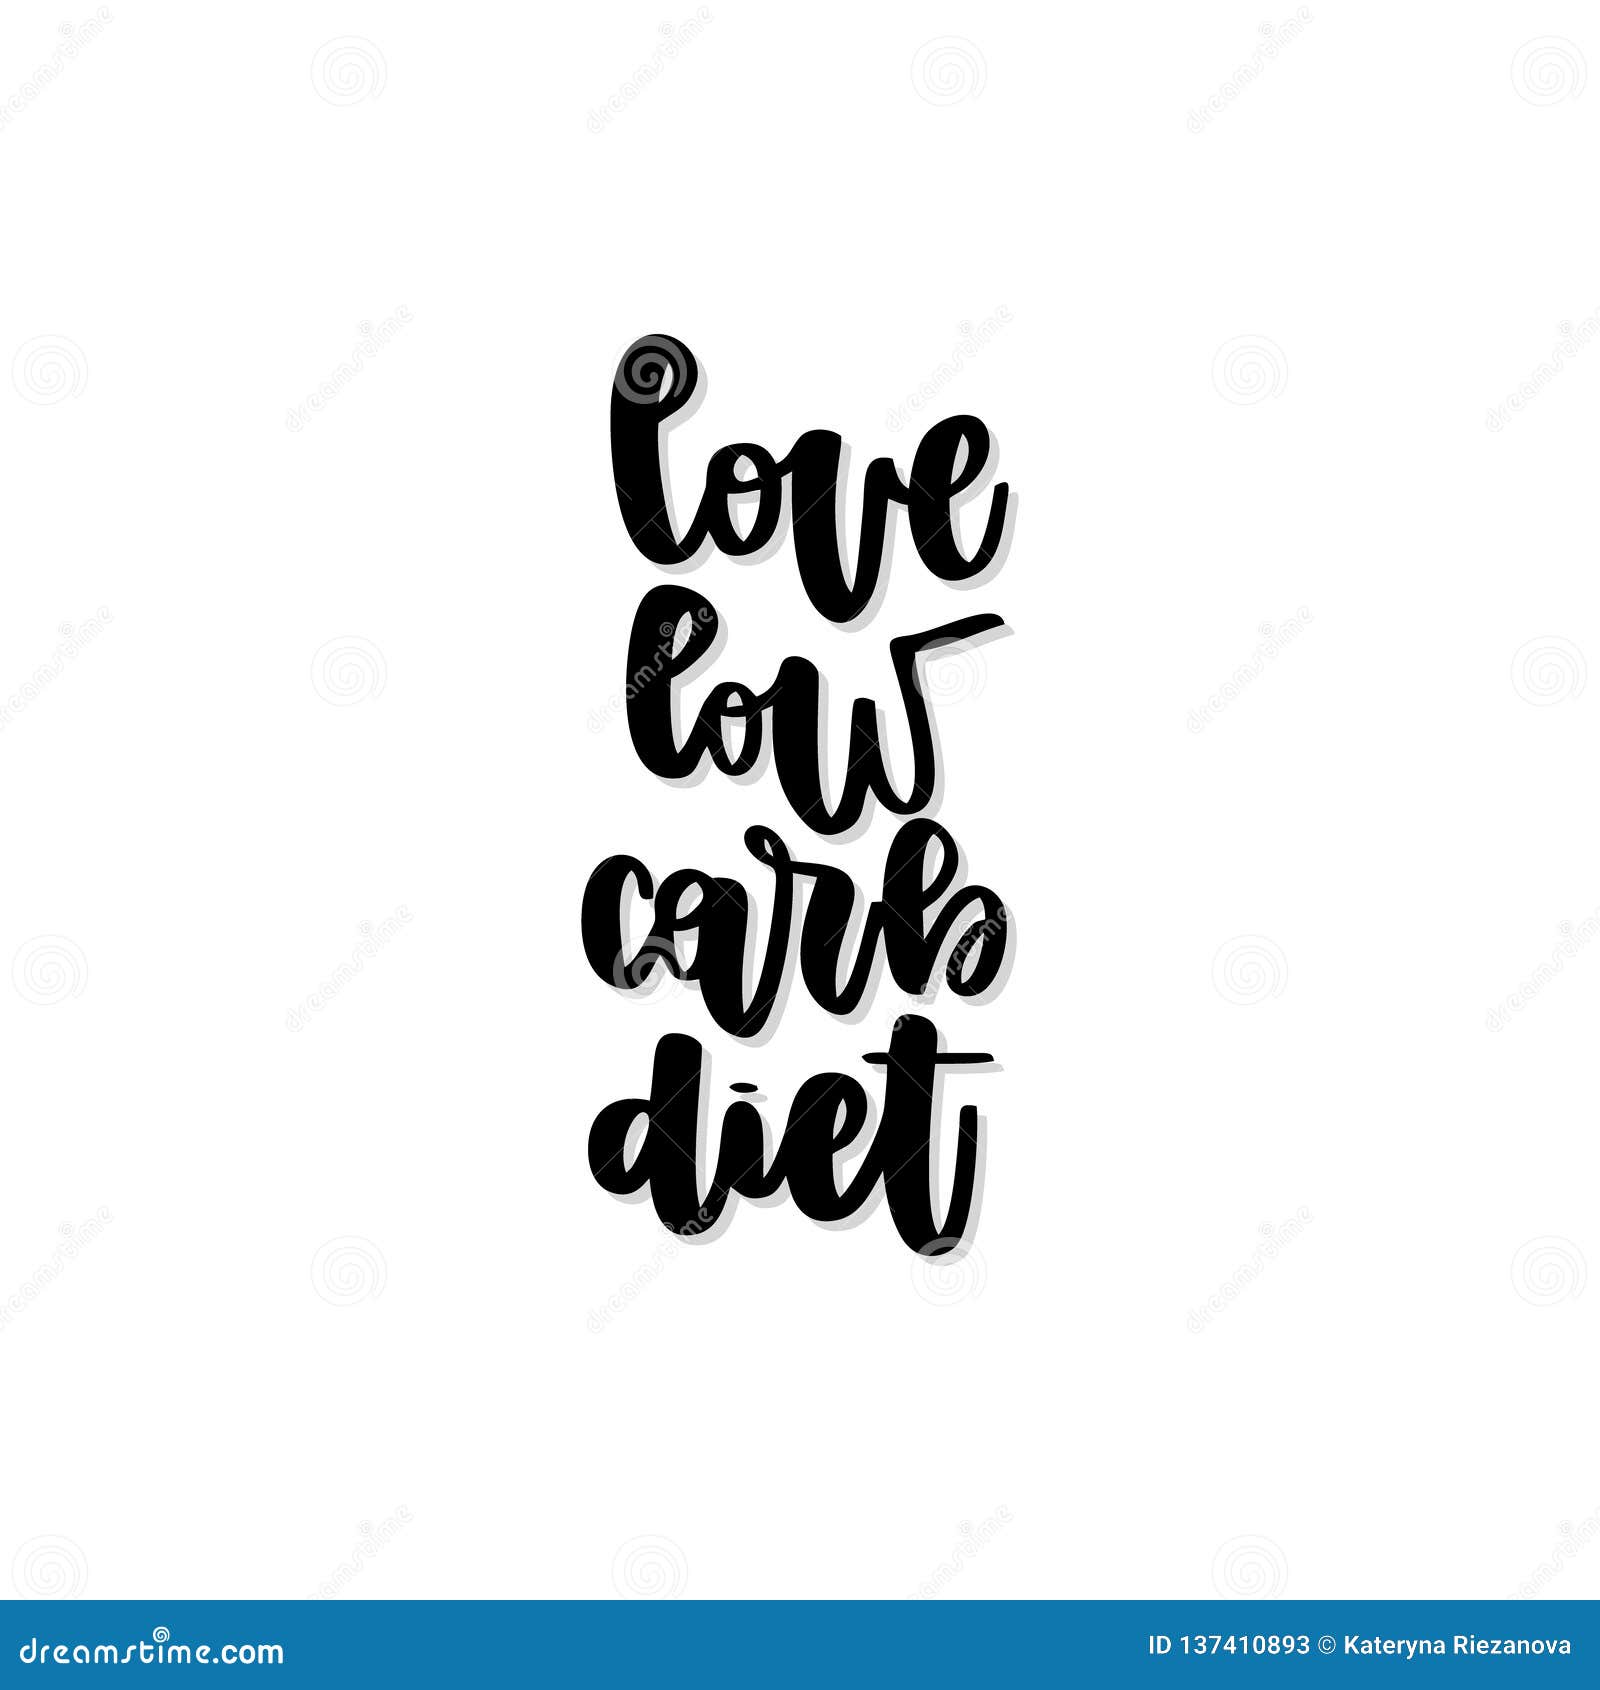 Love low carb diet quote. stock vector. Illustration of love - 137410893